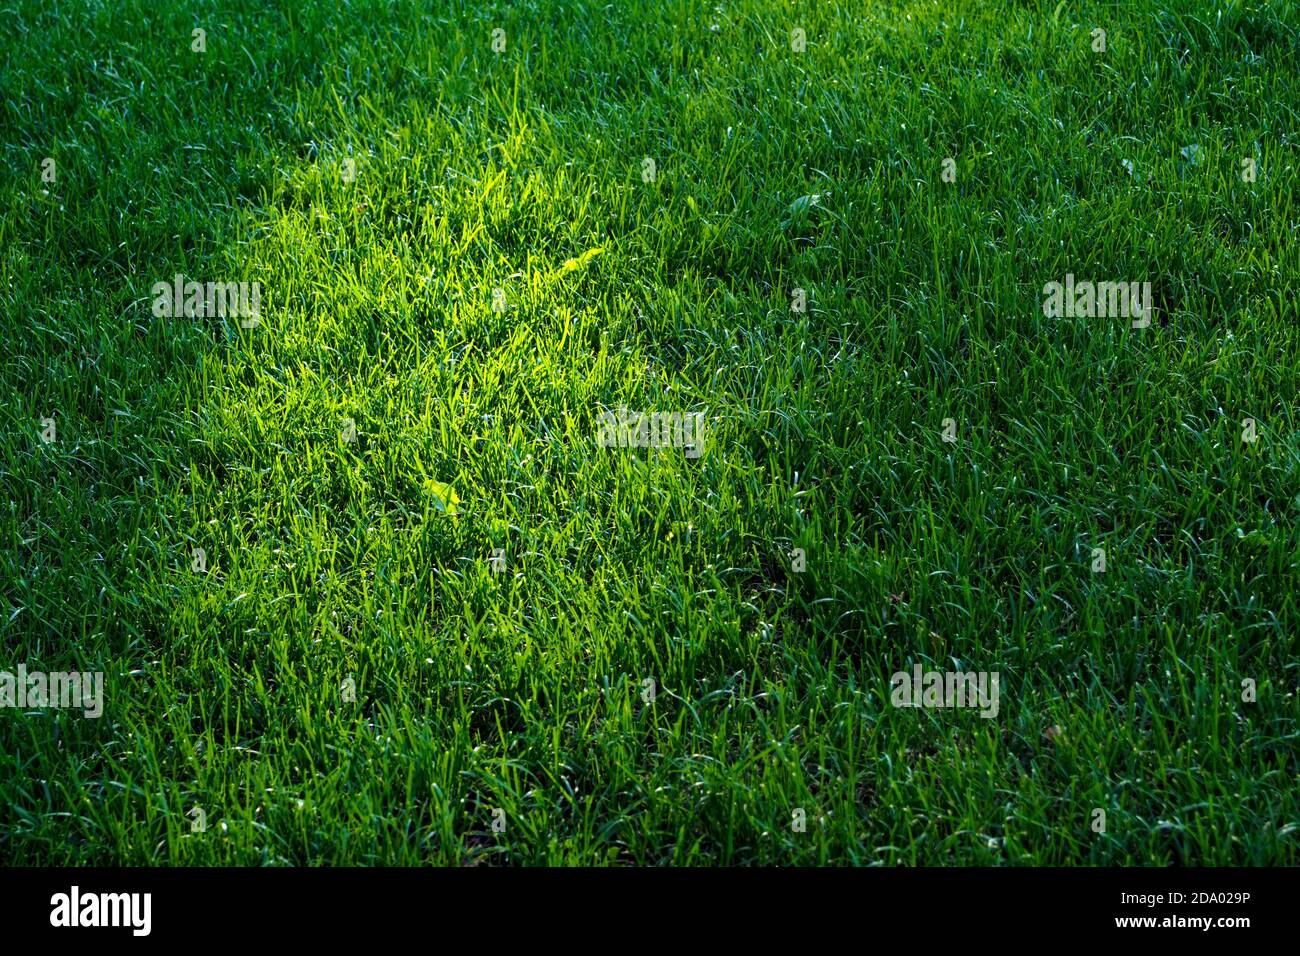 Green lawn, grass background, selective focus, copy space. Stock Photo